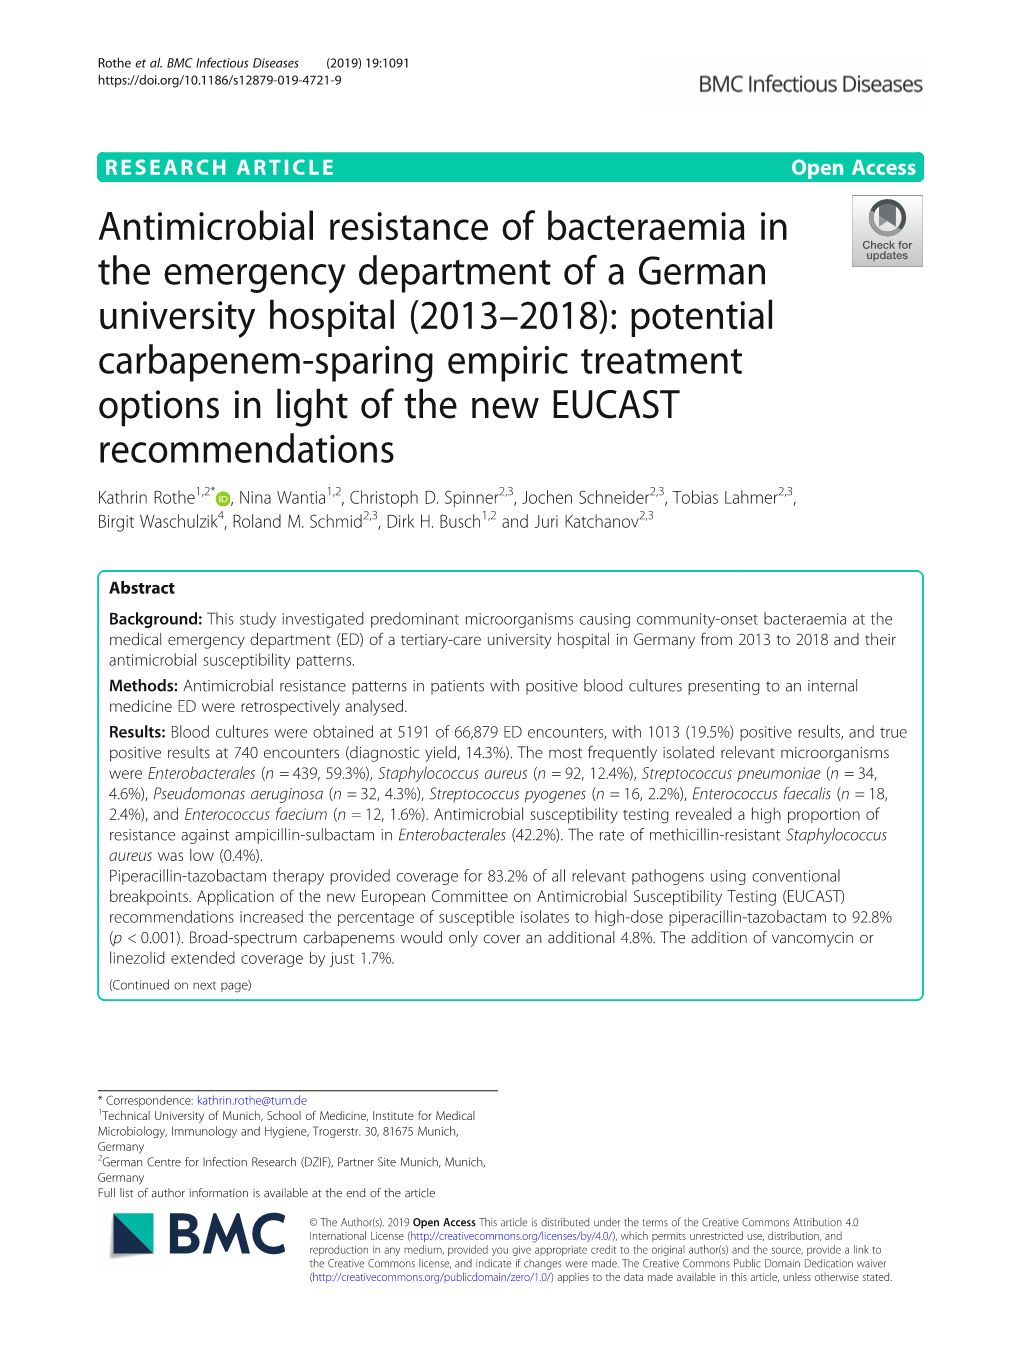 Antimicrobial Resistance of Bacteraemia in the Emergency